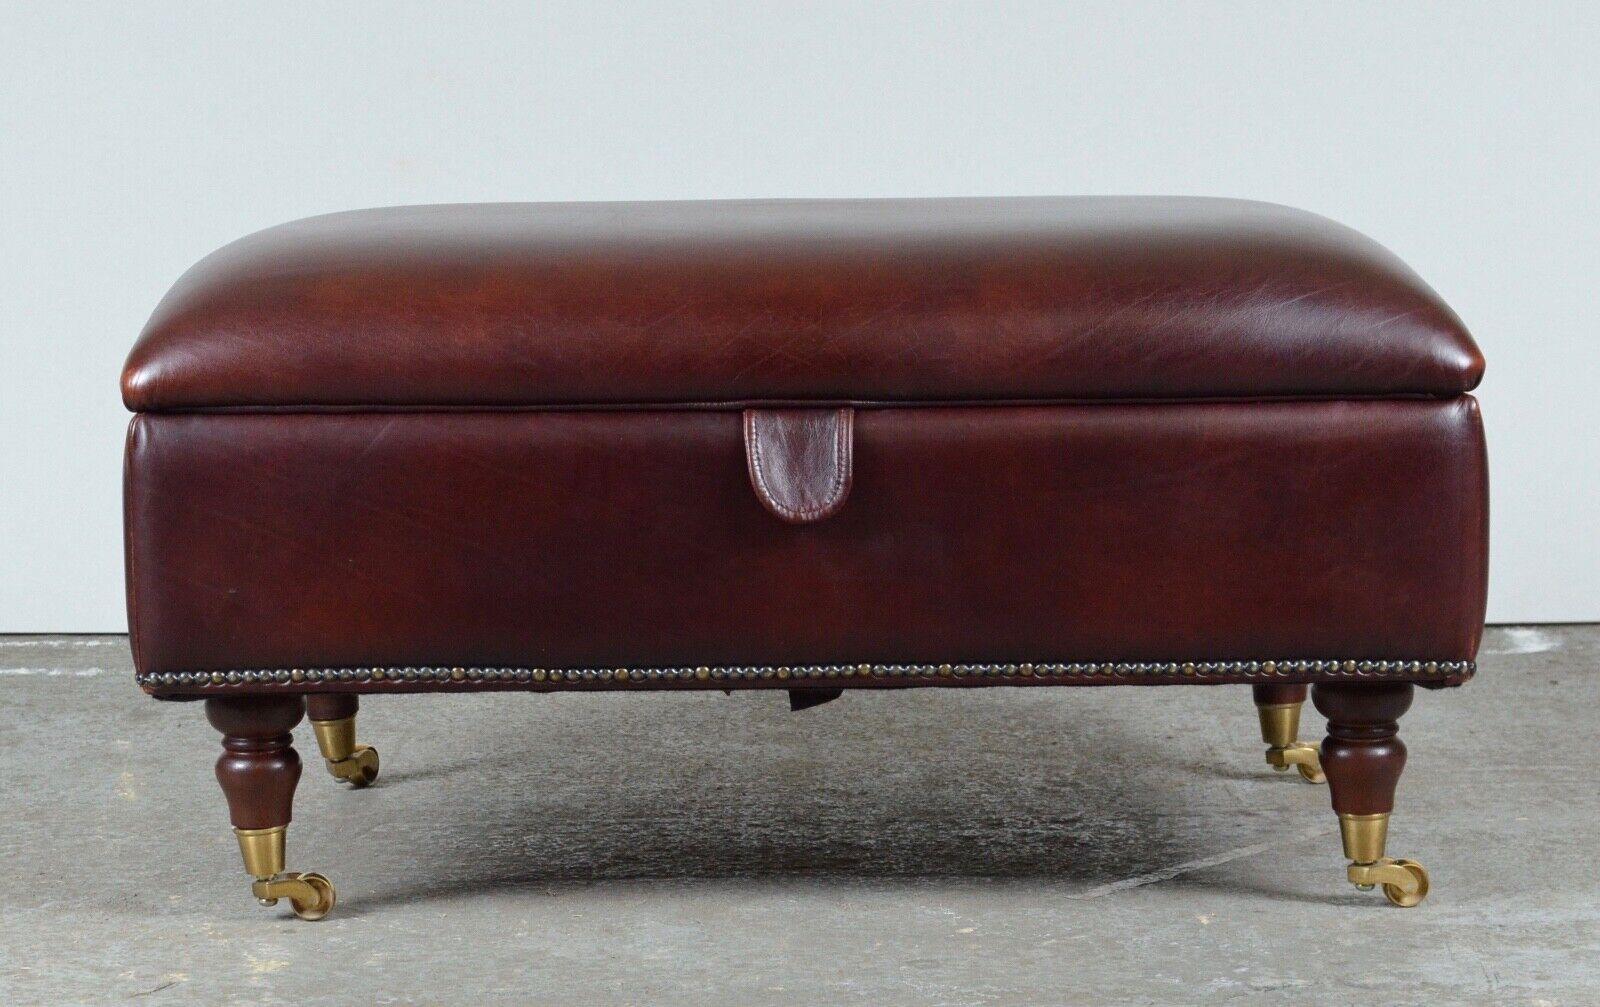 We are delighted to offer for sale this lovely Large Laura Ashley Elliot Heritage Brown Leather Footstool with Internal Storage.

A good looking well-made stool in Laura Ashley heritage leather, it has a beech wood frame with brass castors.

We